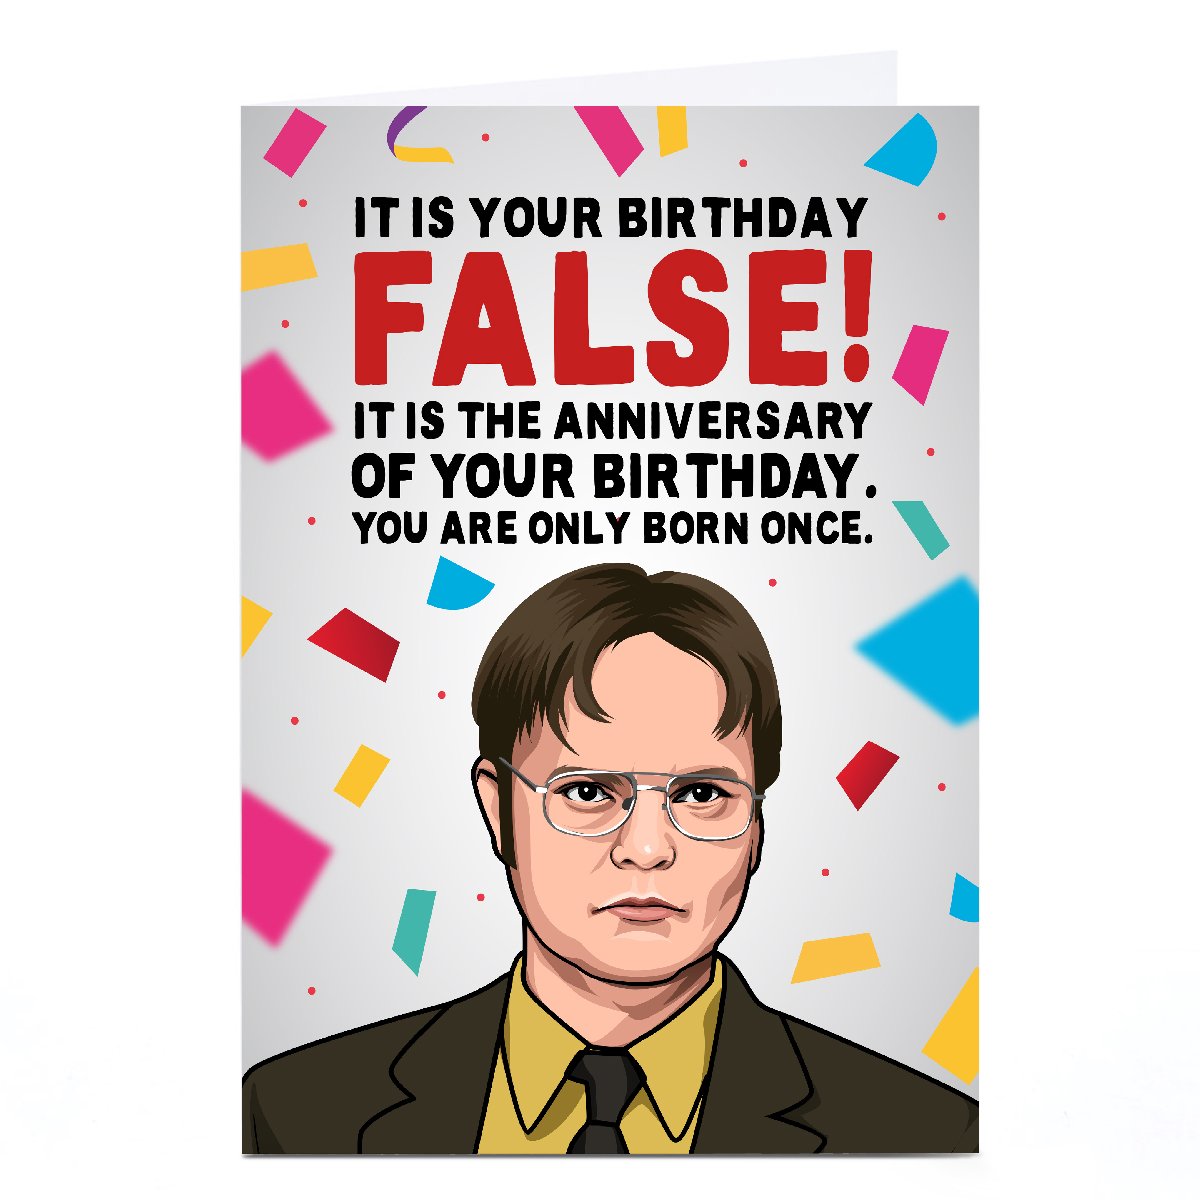 Personalised All Things Banter Birthday Card - The Anniversary of Your Birthday